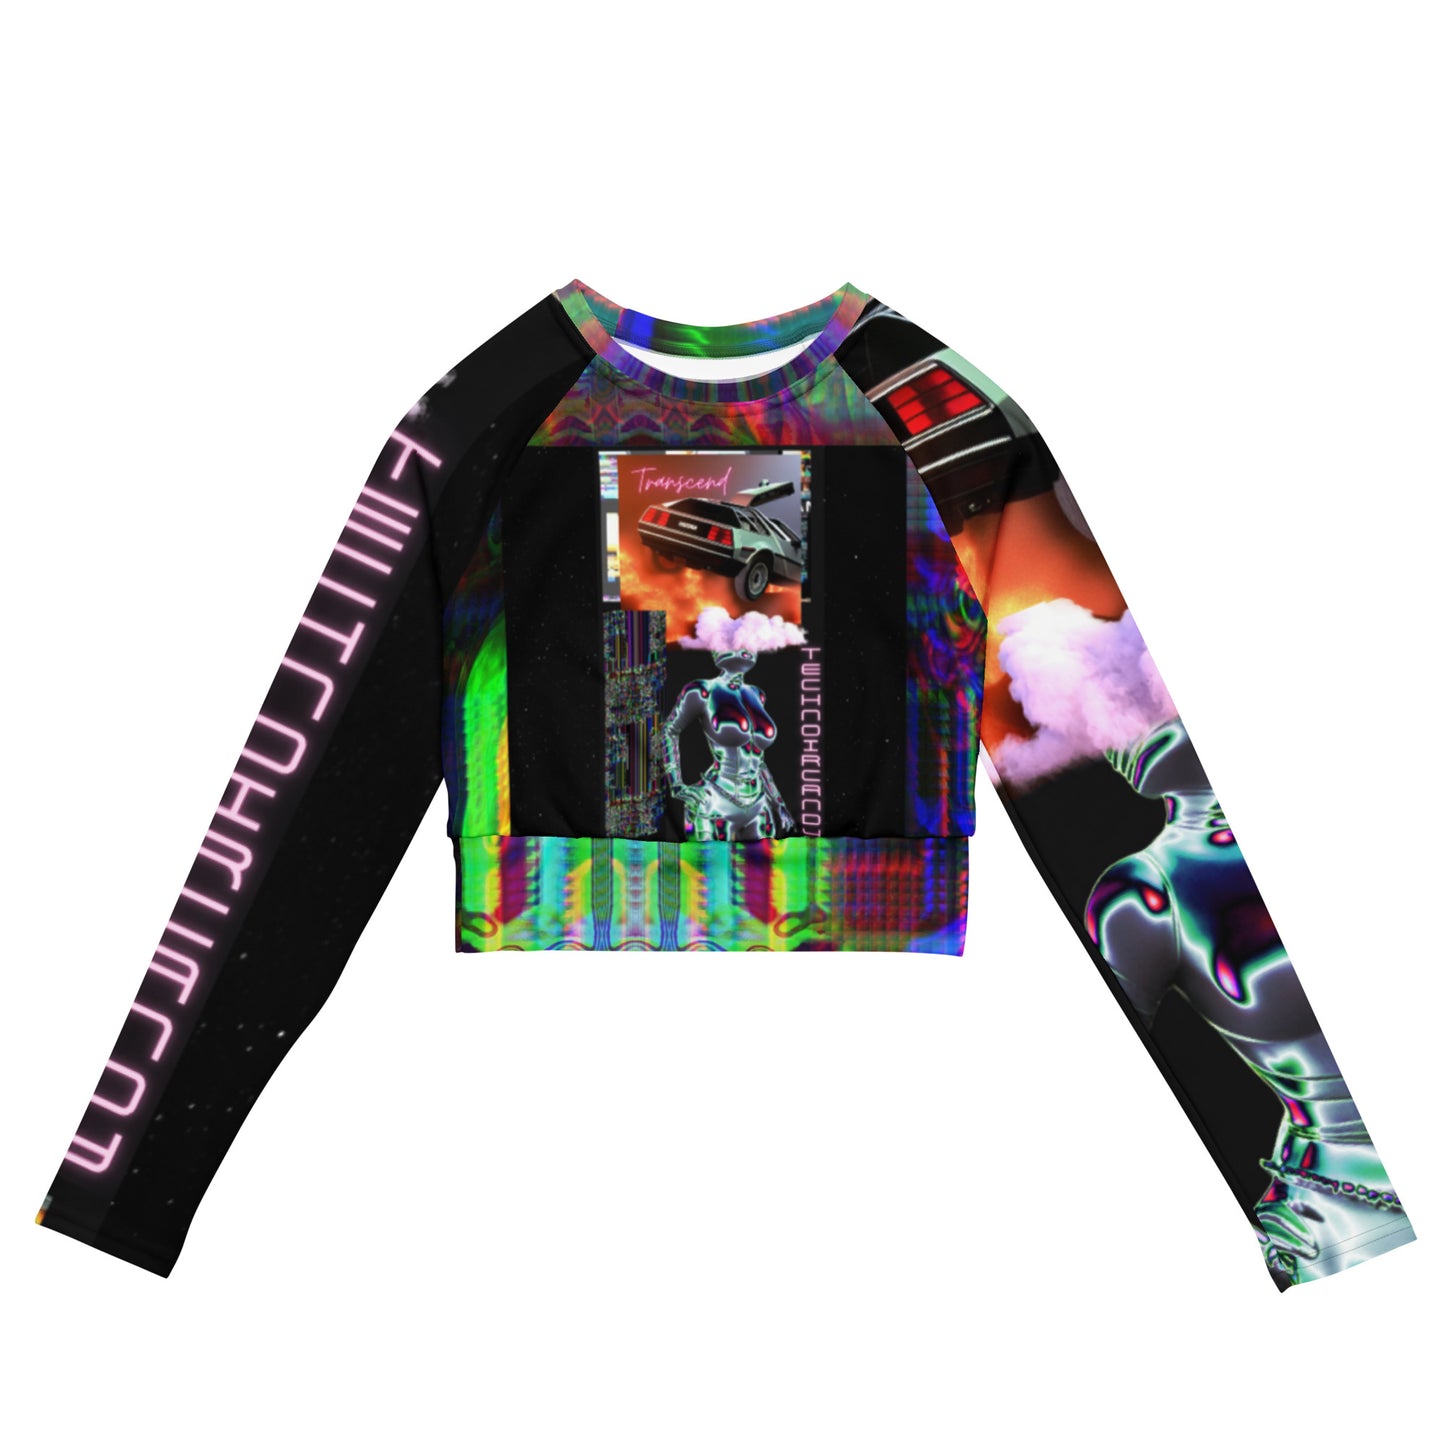 Cybertronic Daymare Recycled long-sleeve crop top